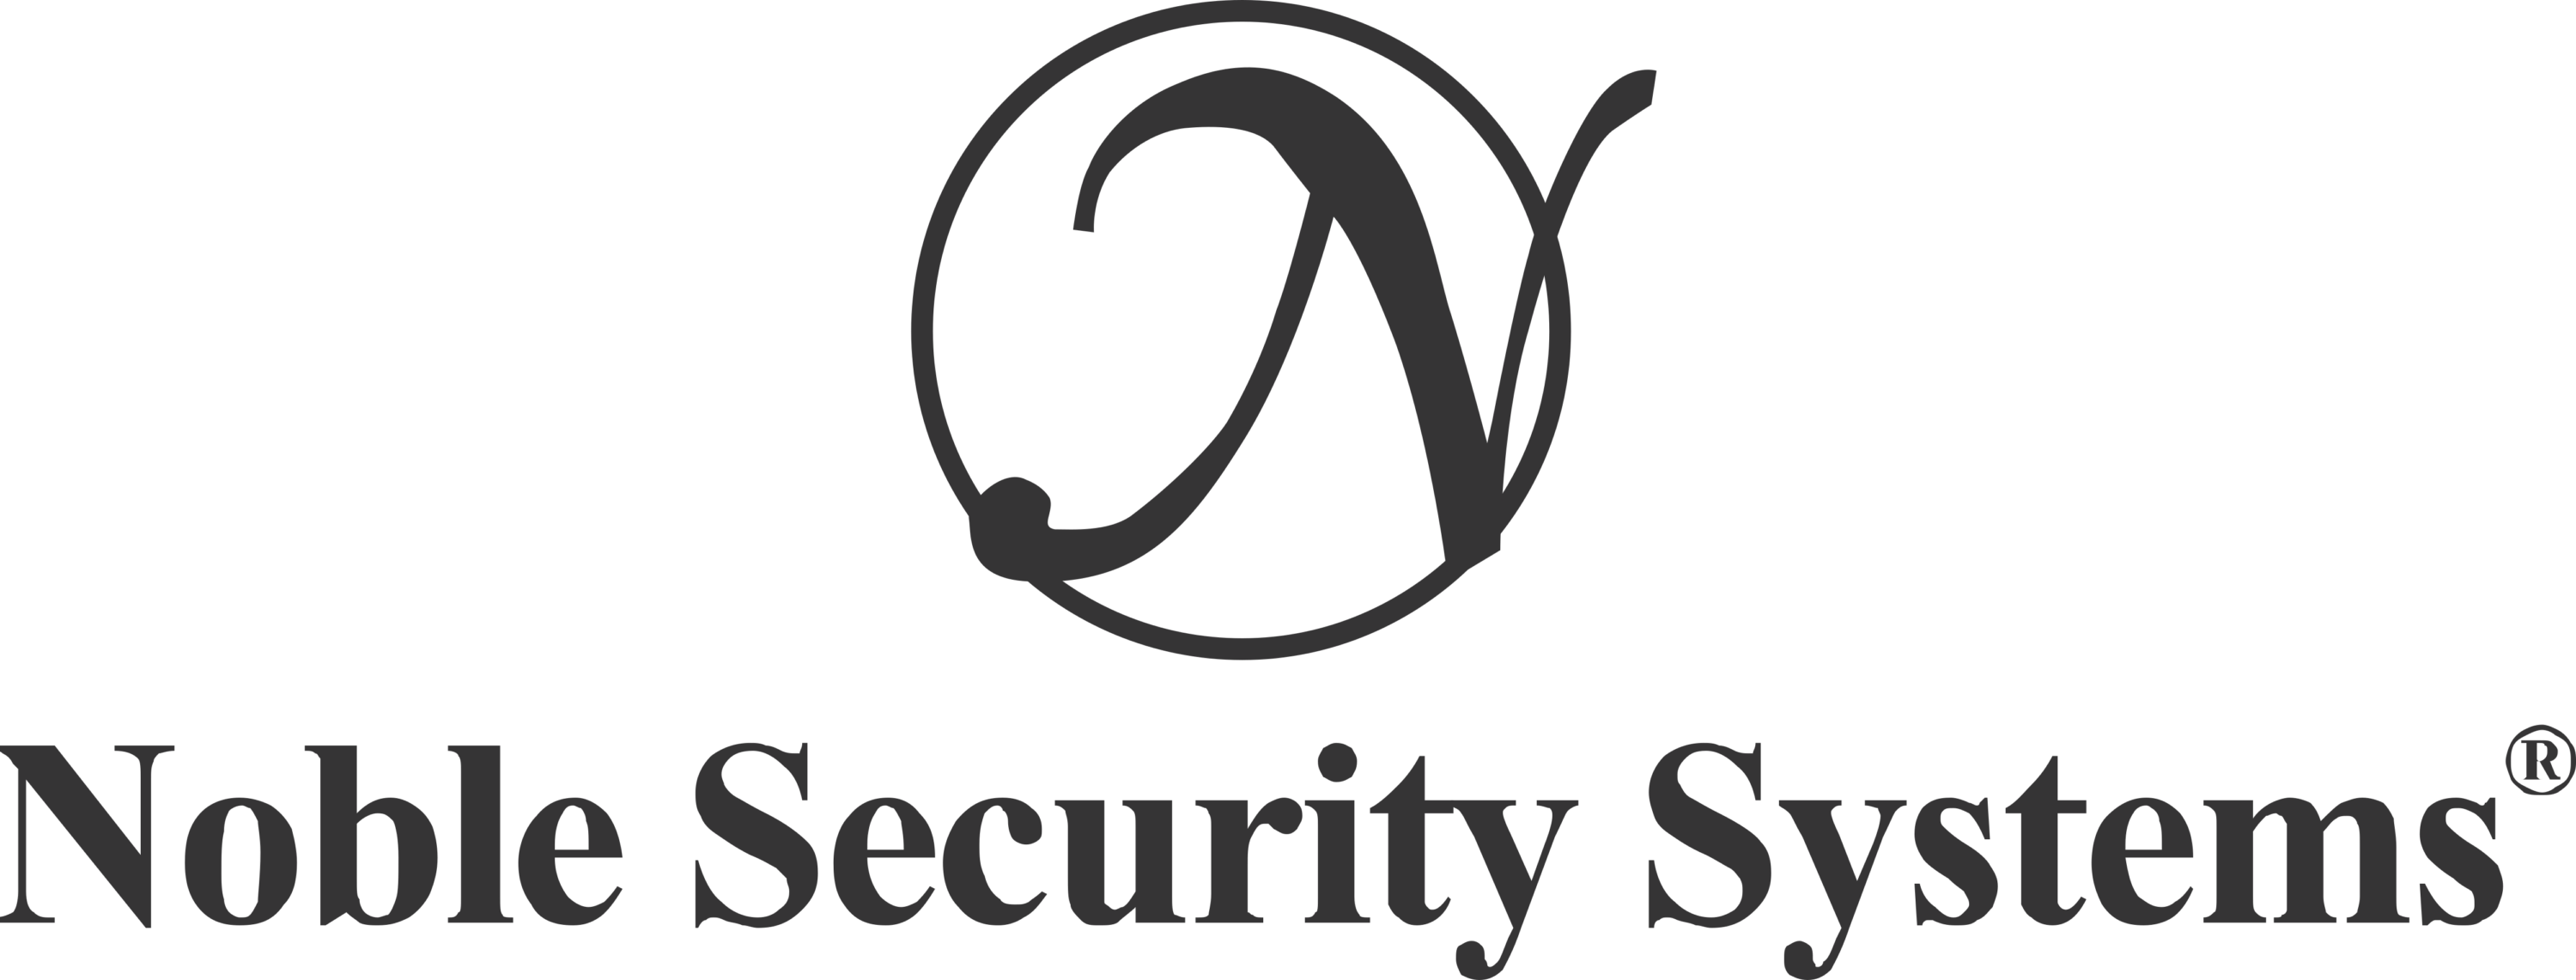 Noble Security Systems Logo